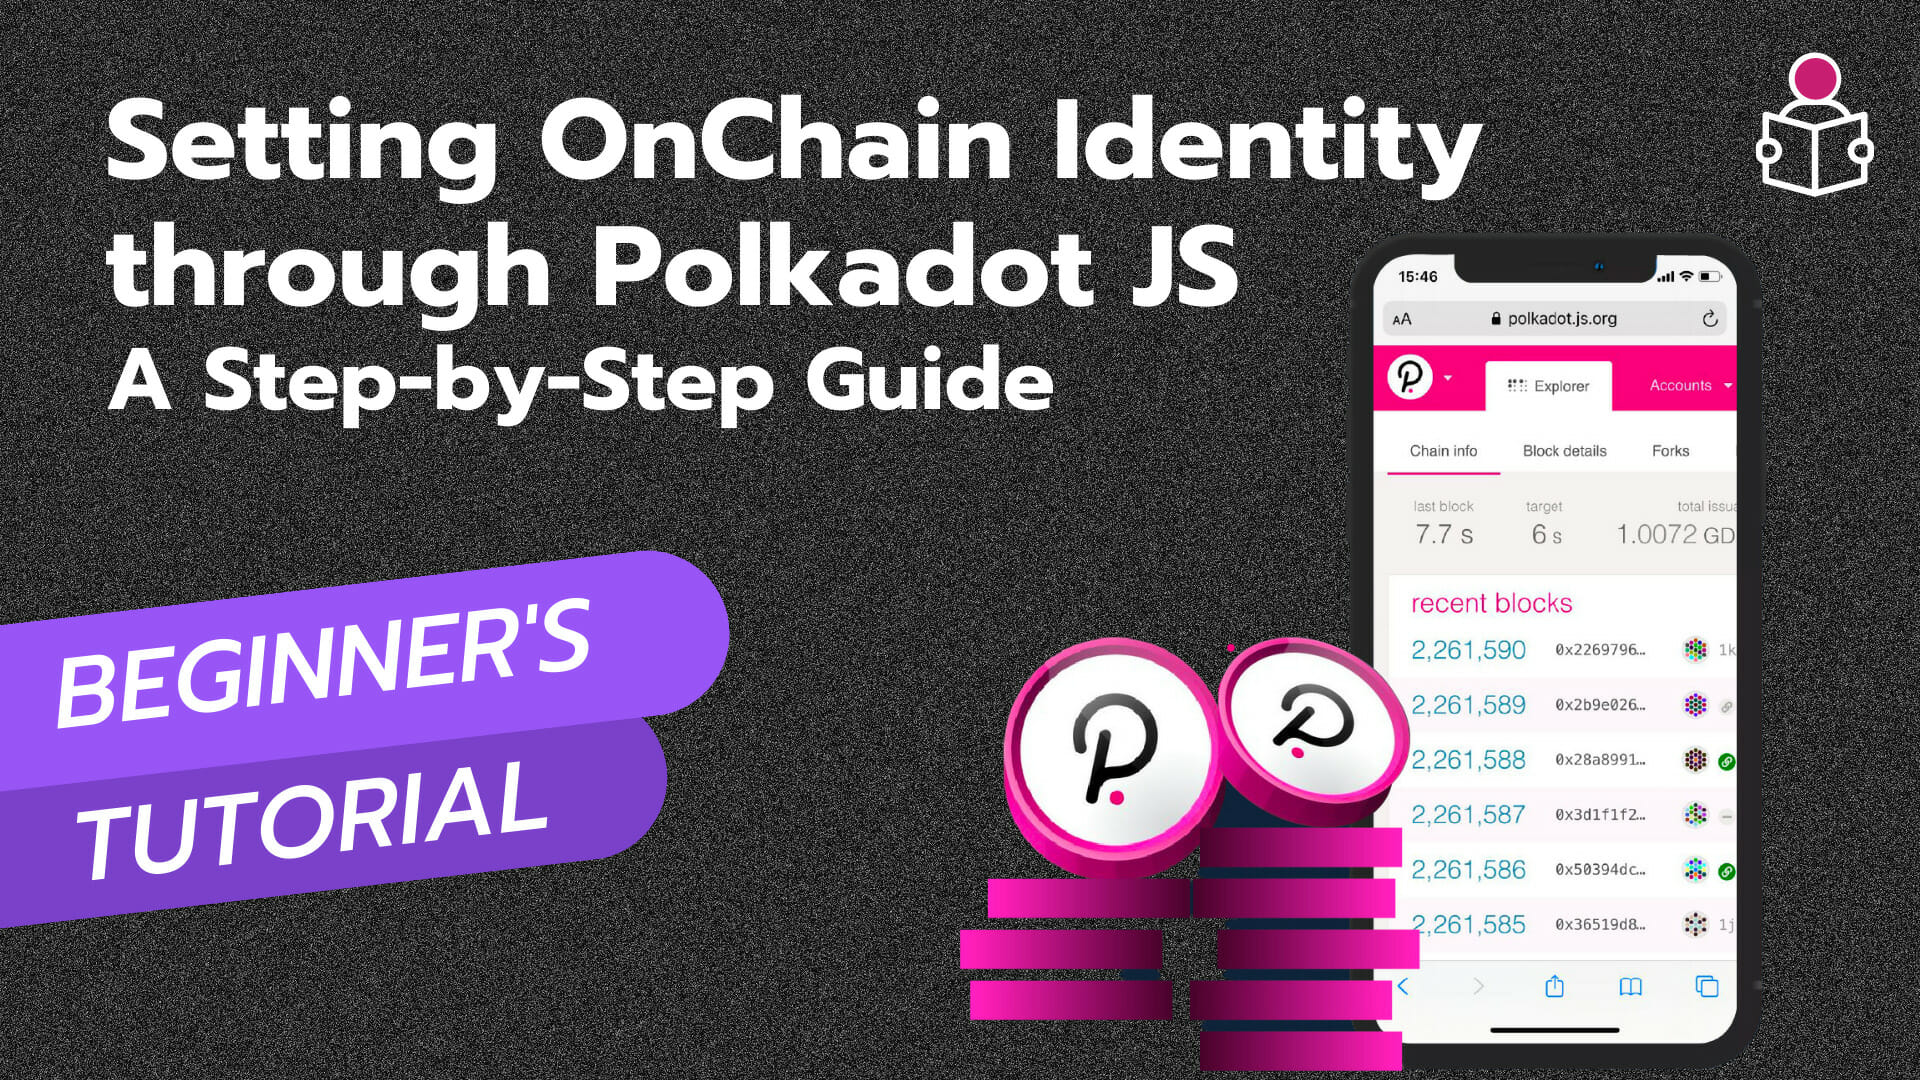 Setting On Chain Identity through Polkadot JS A Step-by-Step Guide - Describedot